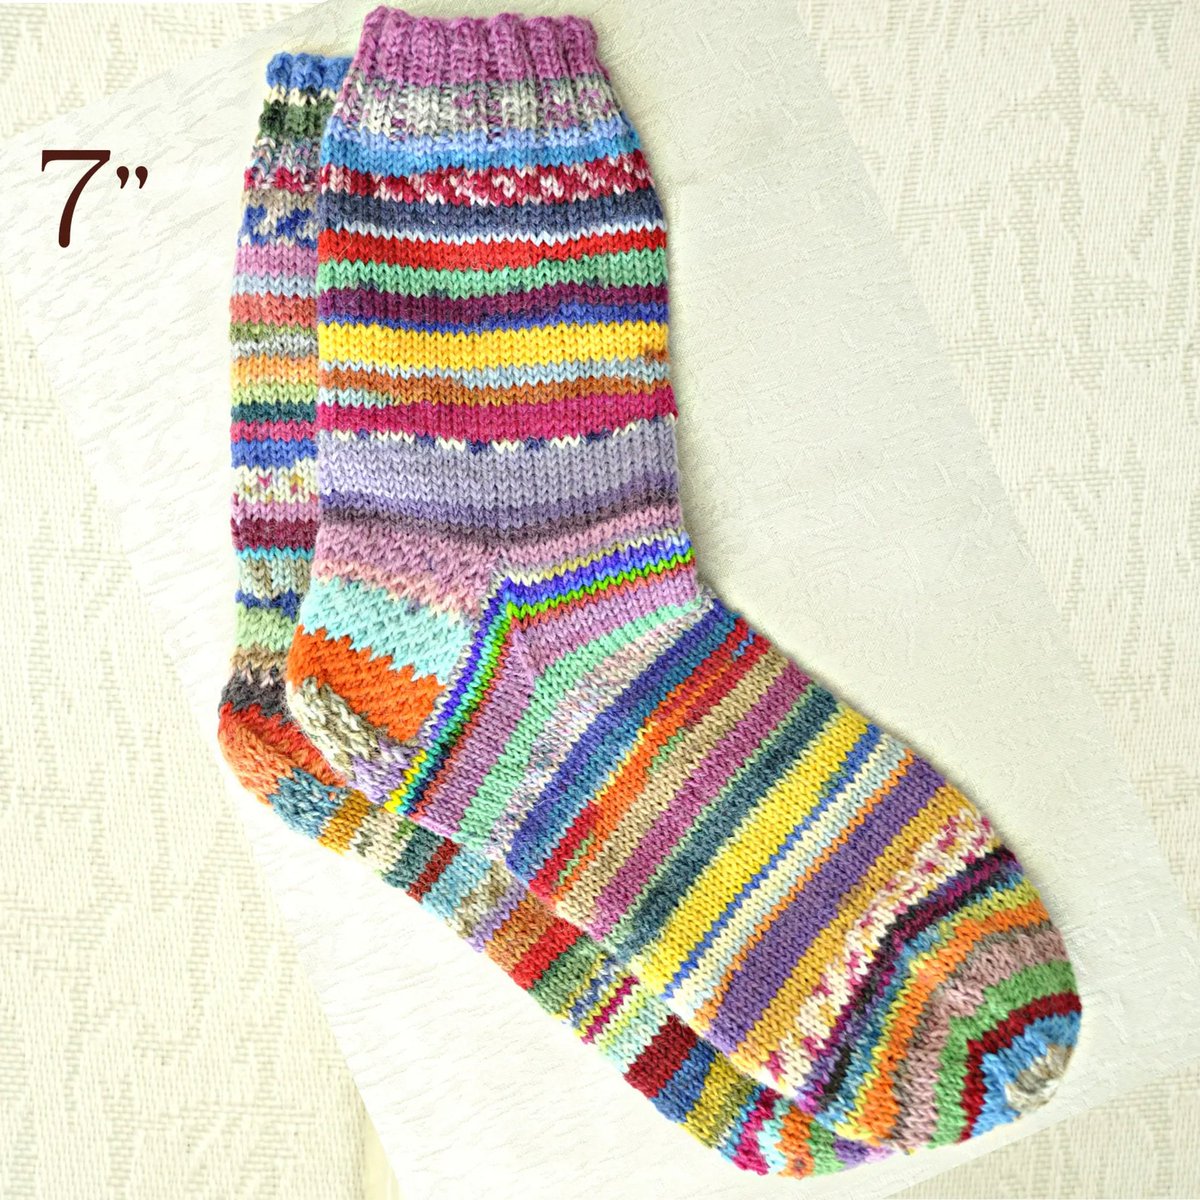 Hand knit wool socks for women who love colorful, odd, mismatched socks for the cold winter season tuppu.net/f8b05adf #love #photooftheday #RoseDay #AIPoweredS24 #woolsocks #artistaasiatico #instagood #beautiful #picoftheday #tbt #WomenSocks